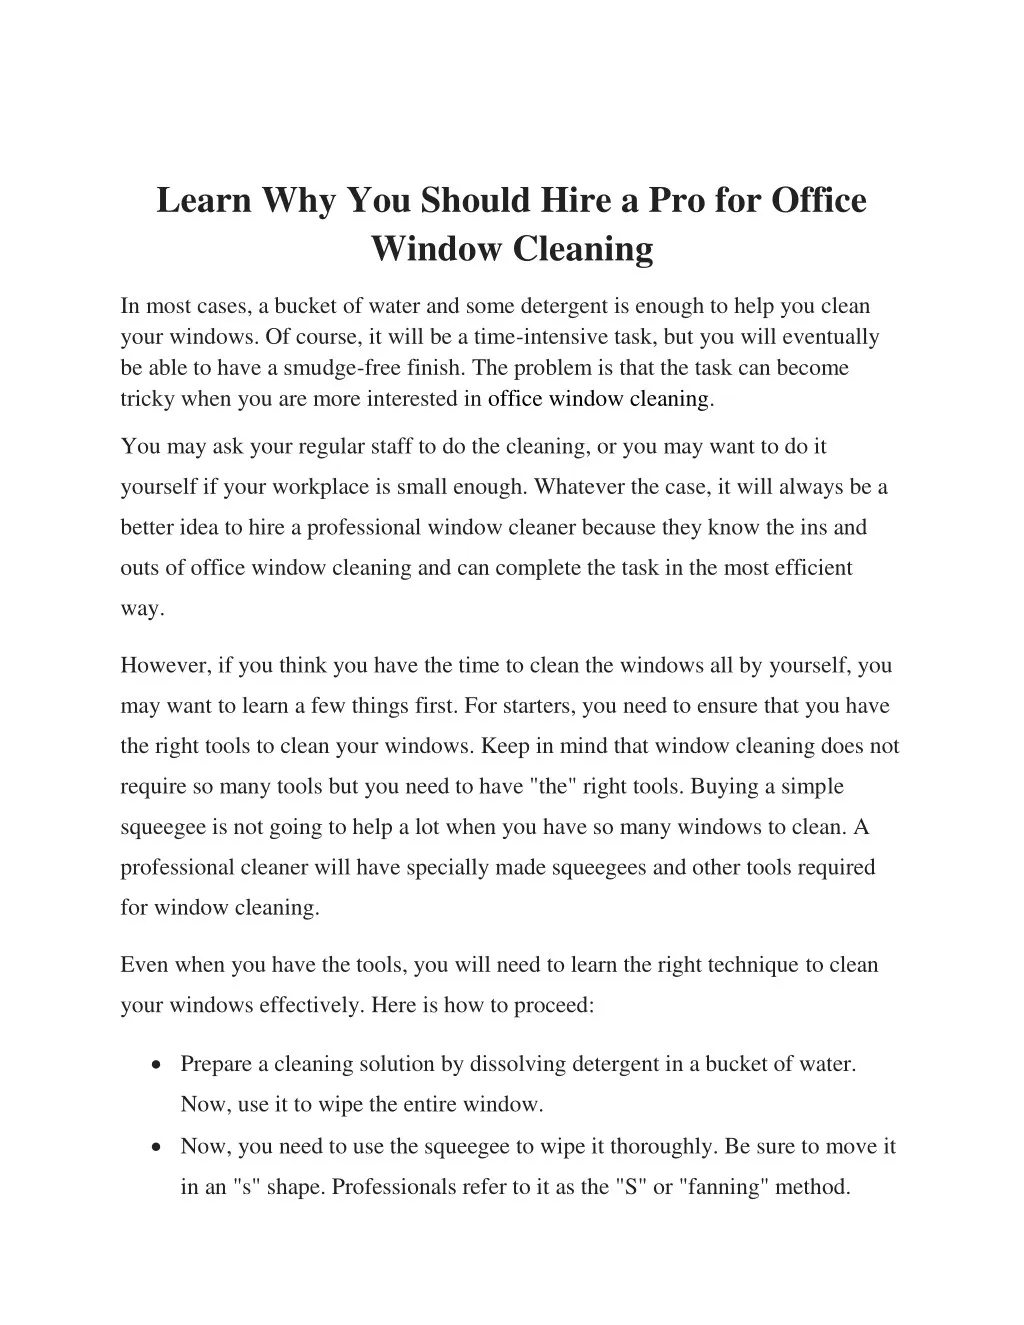 learn why you should hire a pro for office window